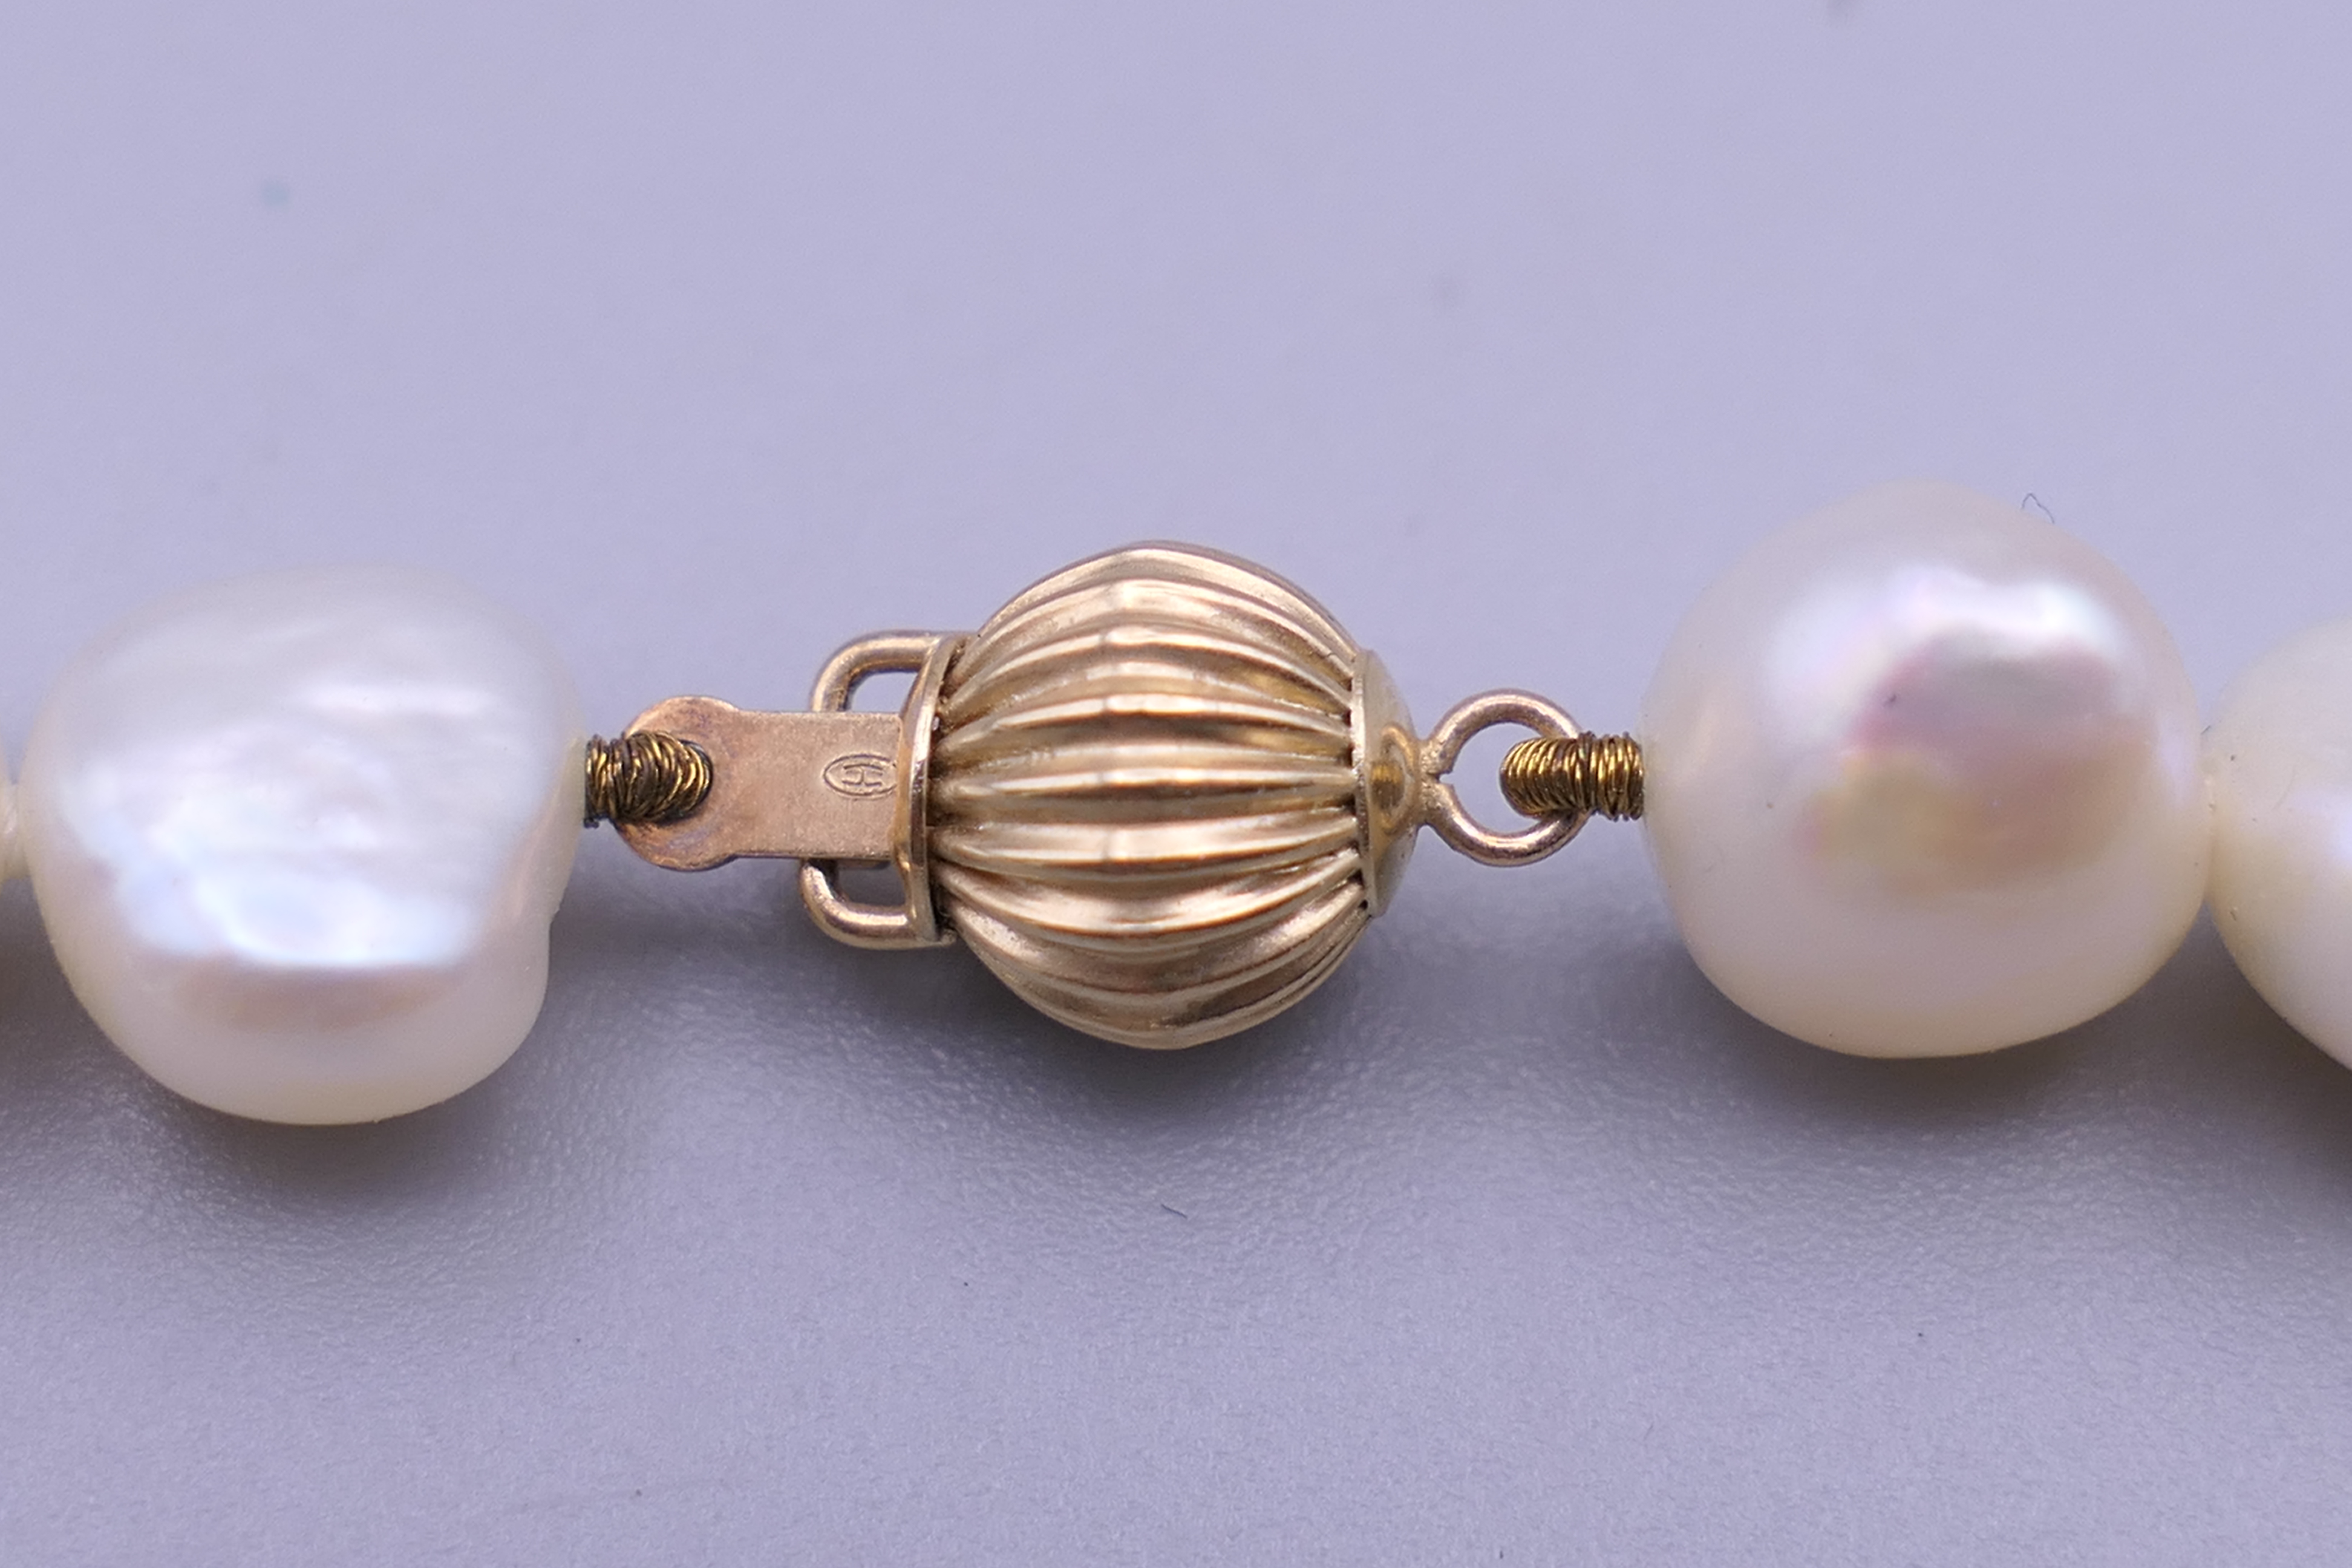 A pearl necklace with a 14 ct gold clasp - Image 7 of 7